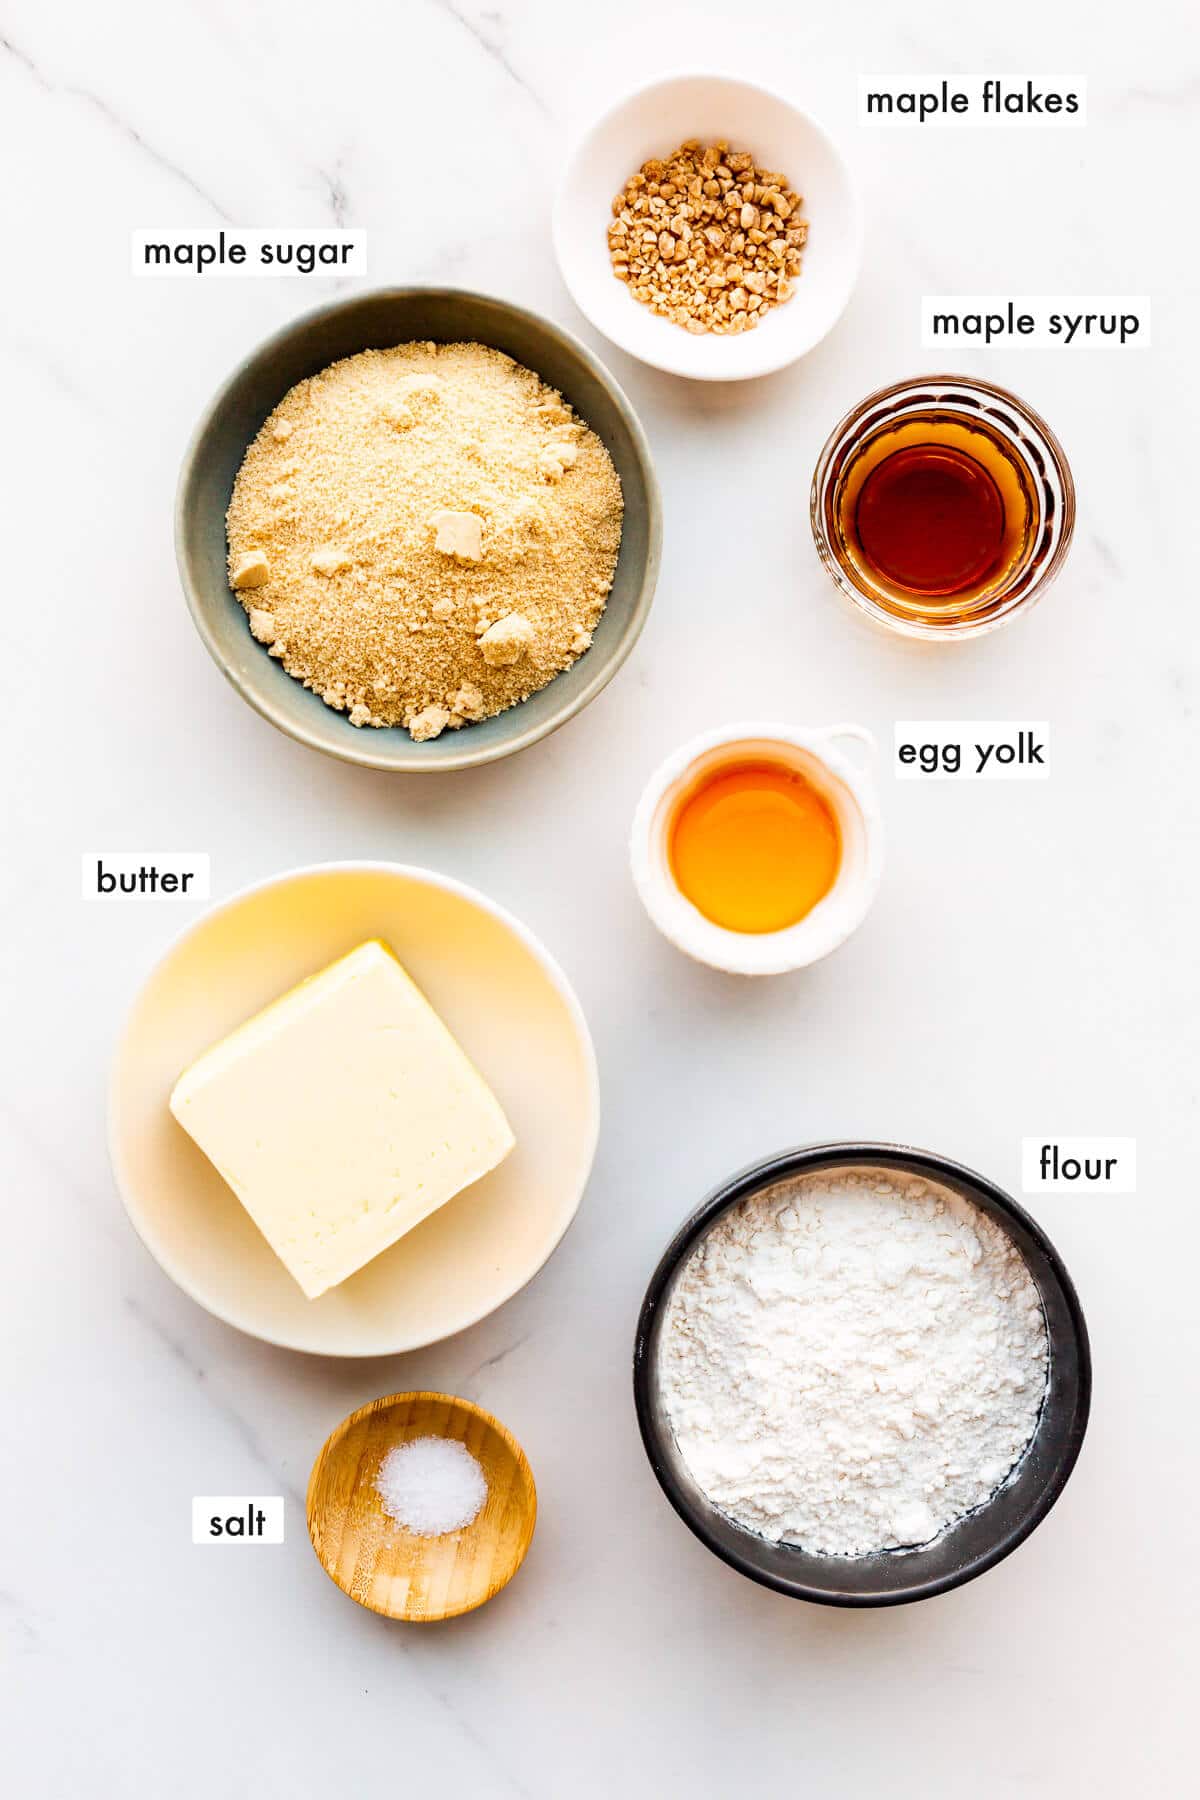 Ingredients to make maple shortbread cookies from scratch with real maple syrup, maple sugar, and maple flakes.